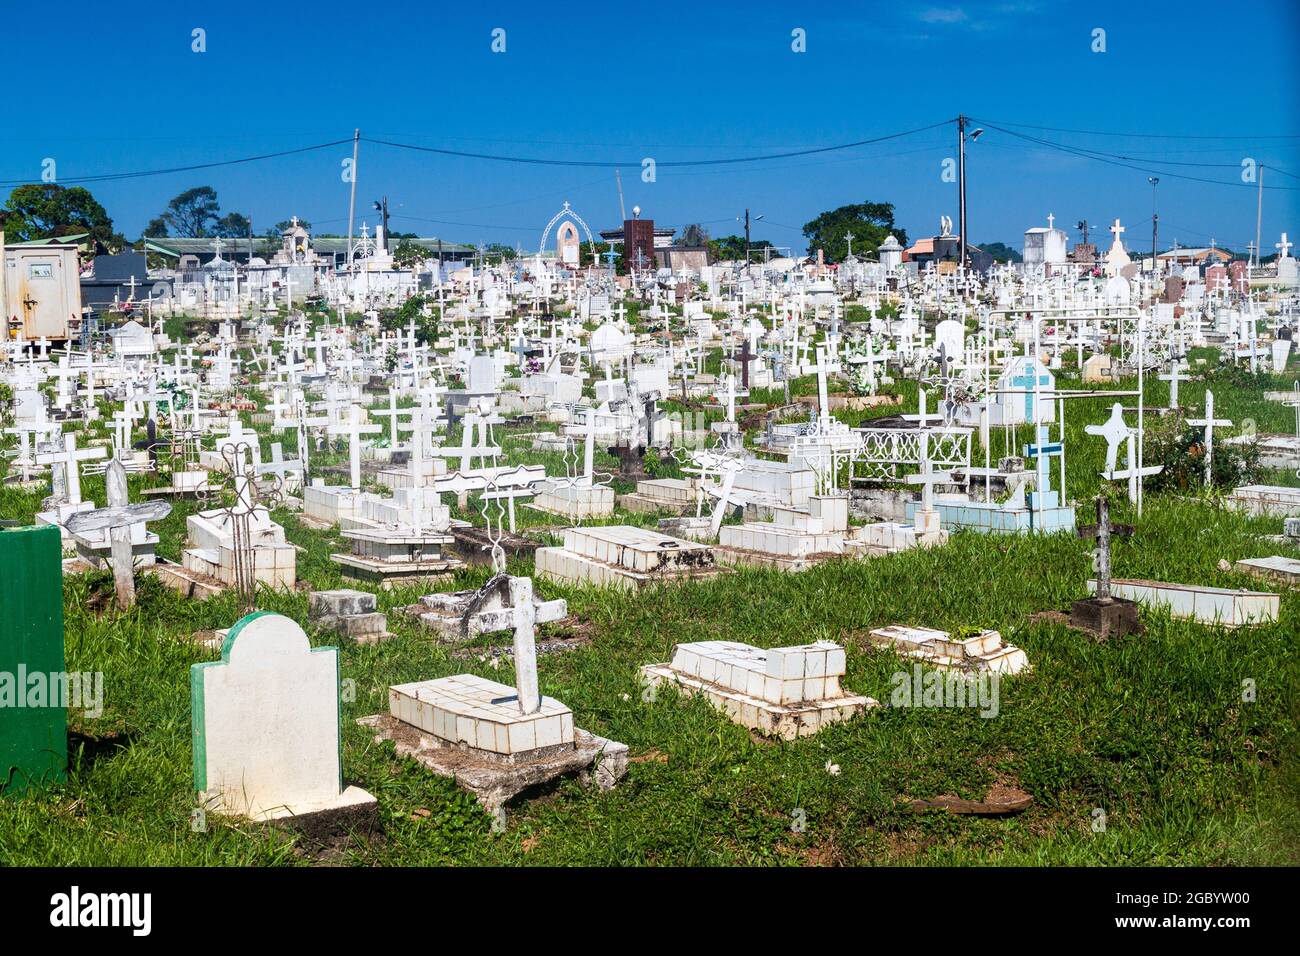 Cemetery in Cayenne, capital of French Guiana. Stock Photo